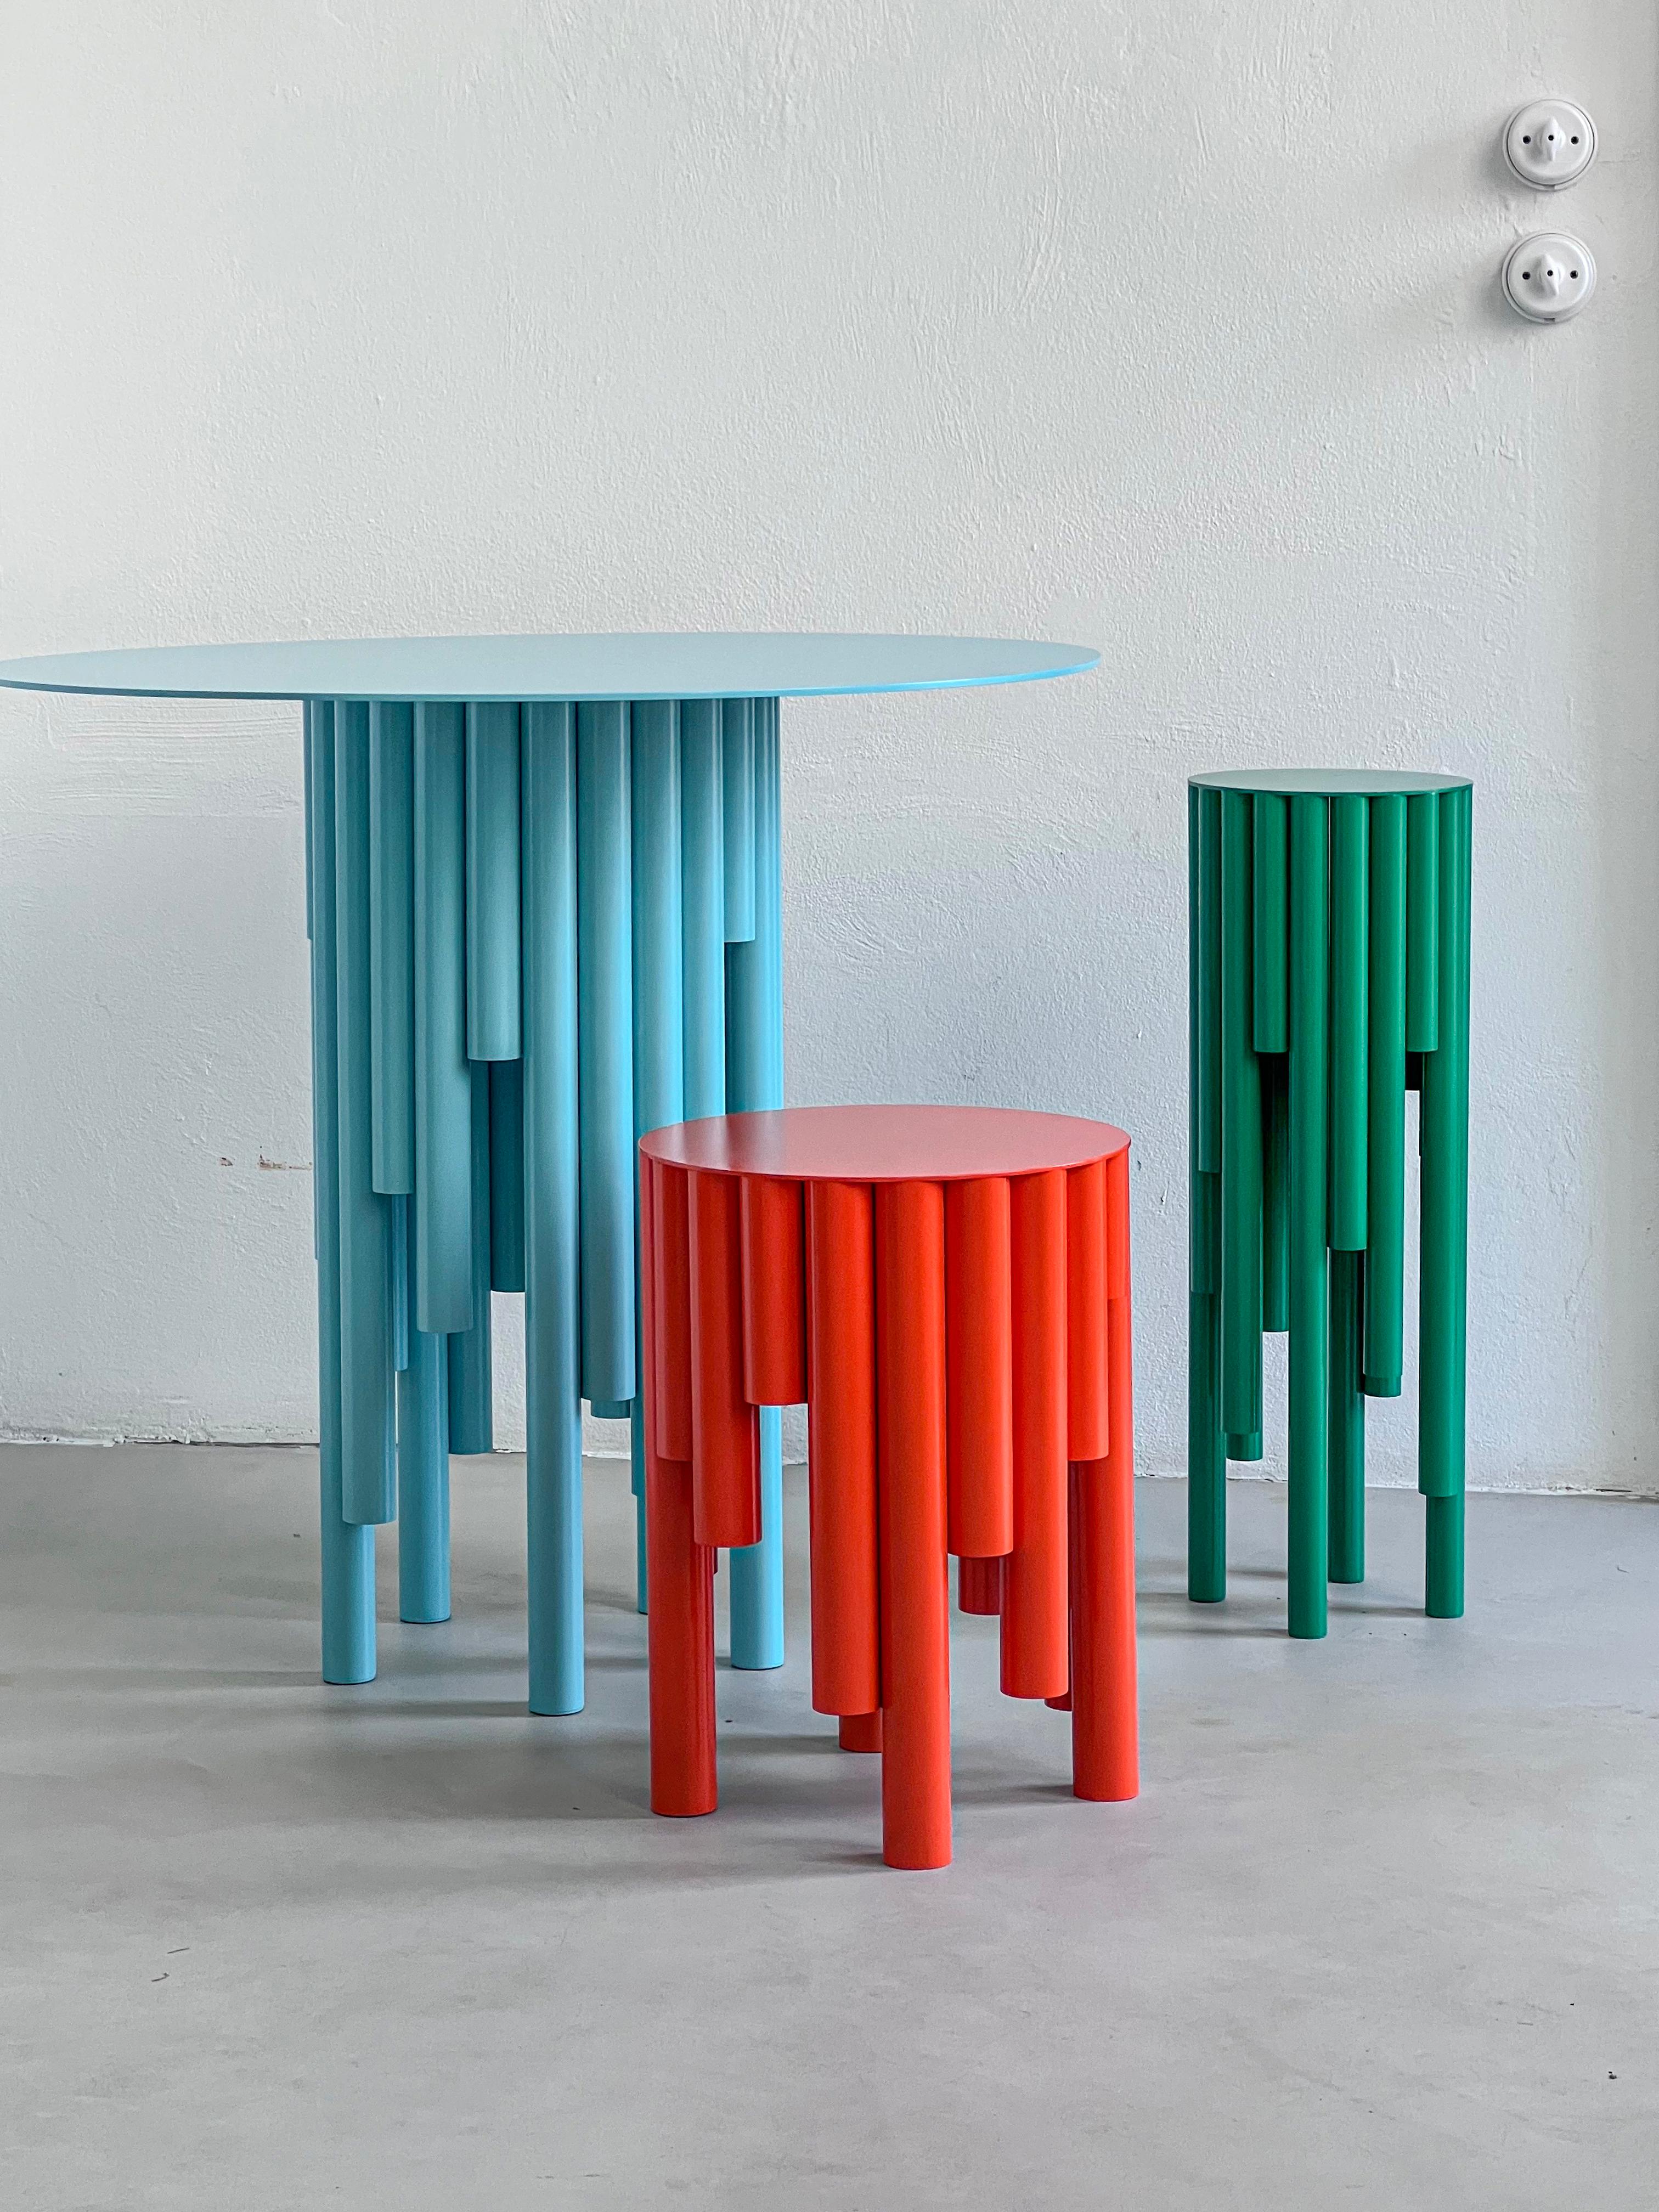 Architectural Side Table - Sculptural End Table - Contemporary Collectible Table

Unveiled on occasion of the 2024 Milano Design Week, this side / end table is part of Spinzi's latest collection, Circus. Coming from a classical inspiration and